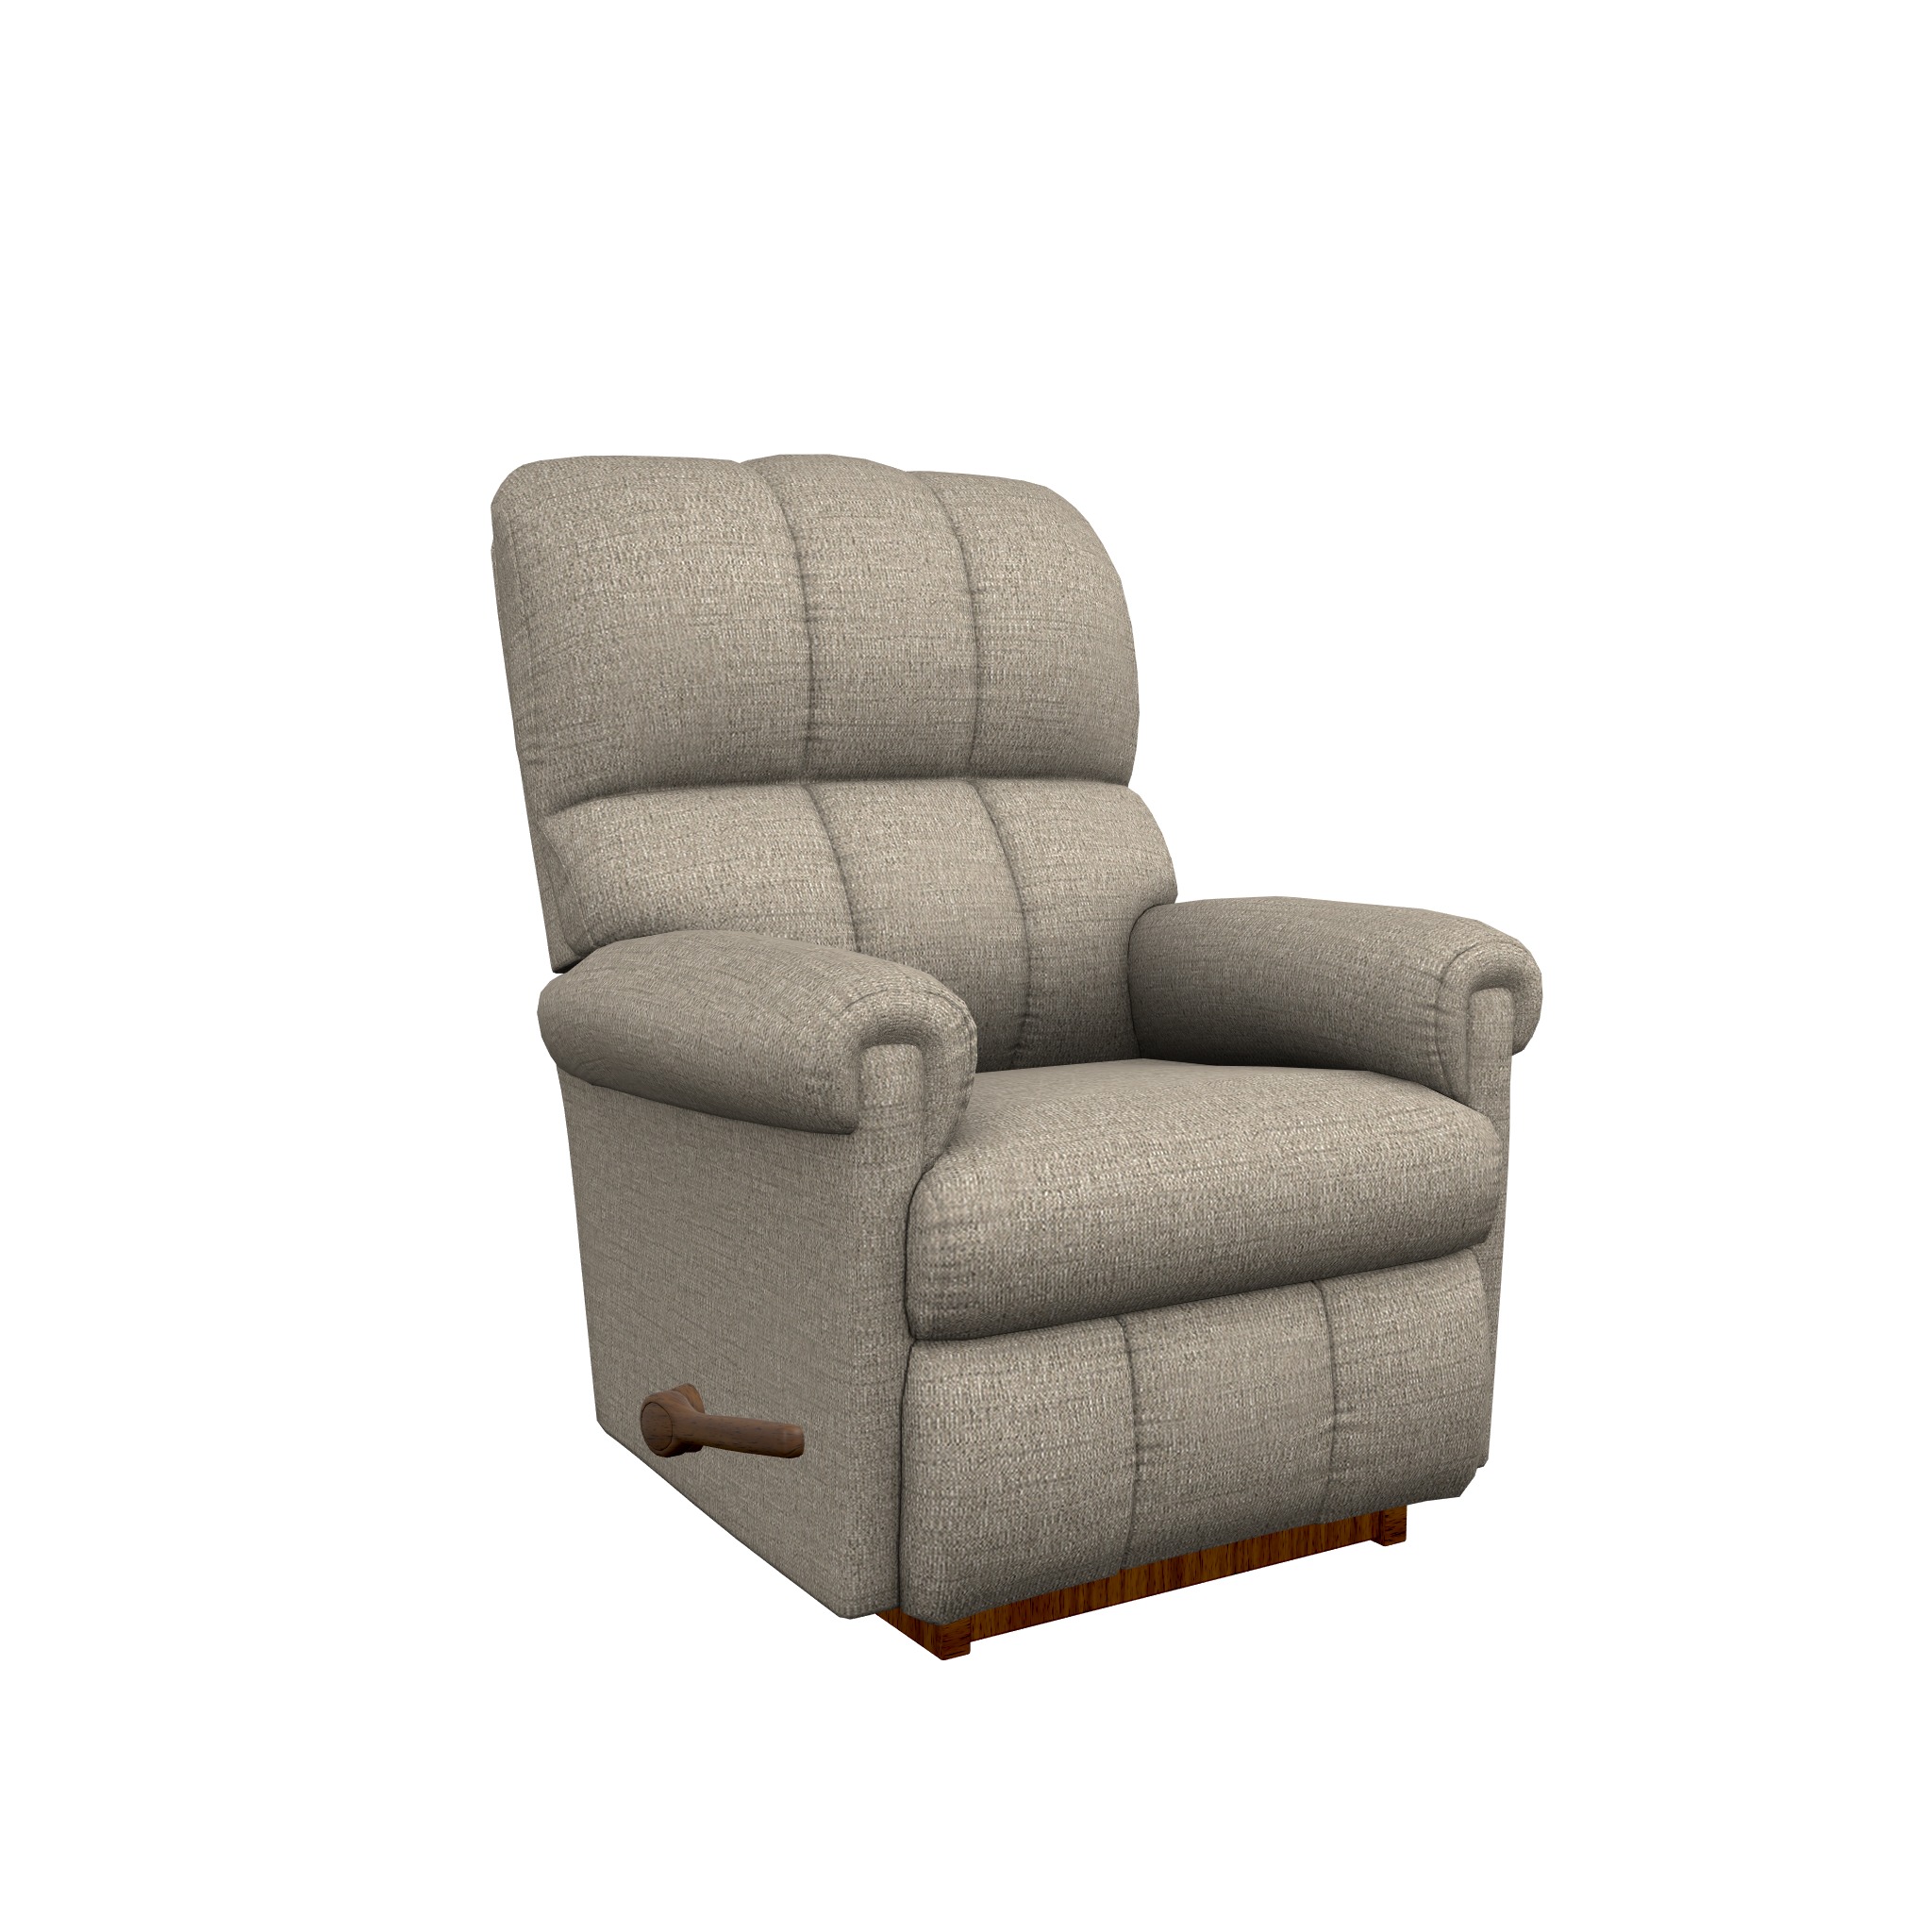 Image - 1 - Vail Fabric Rocking Recliner